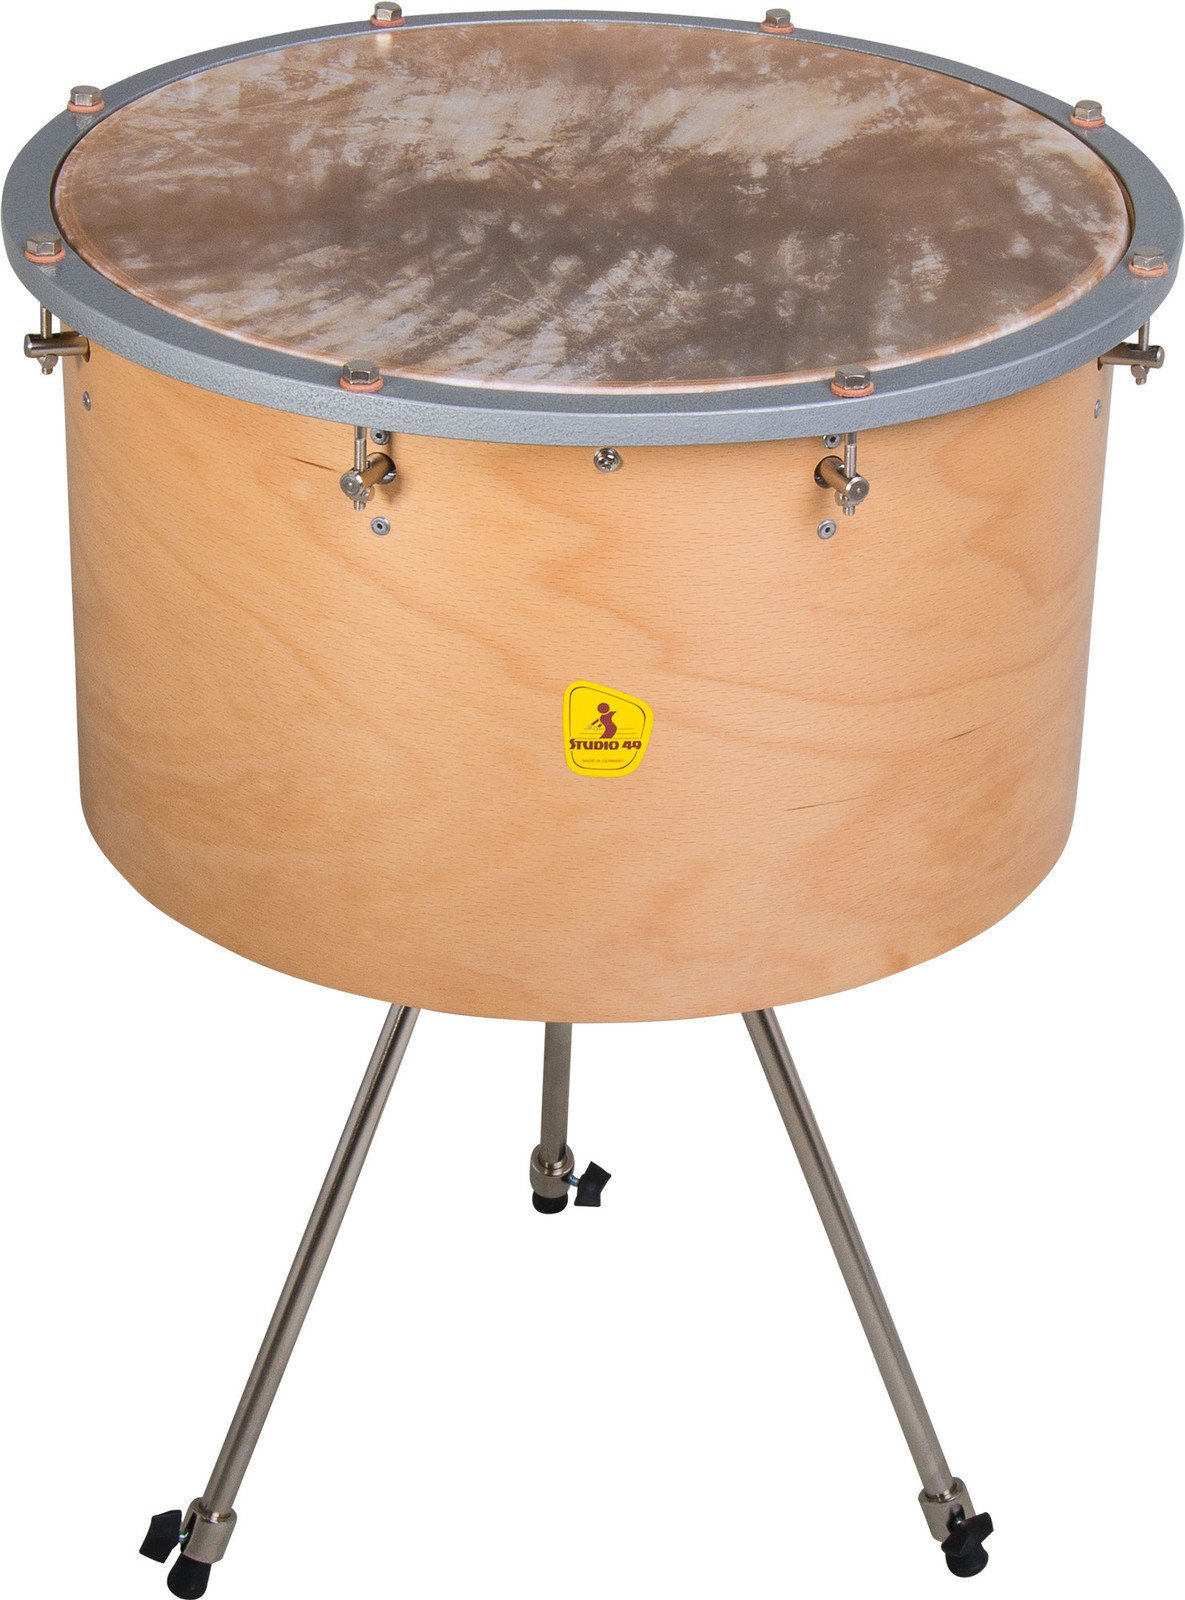 Orchestral Percussion Studio 49 DP-450 Rotary